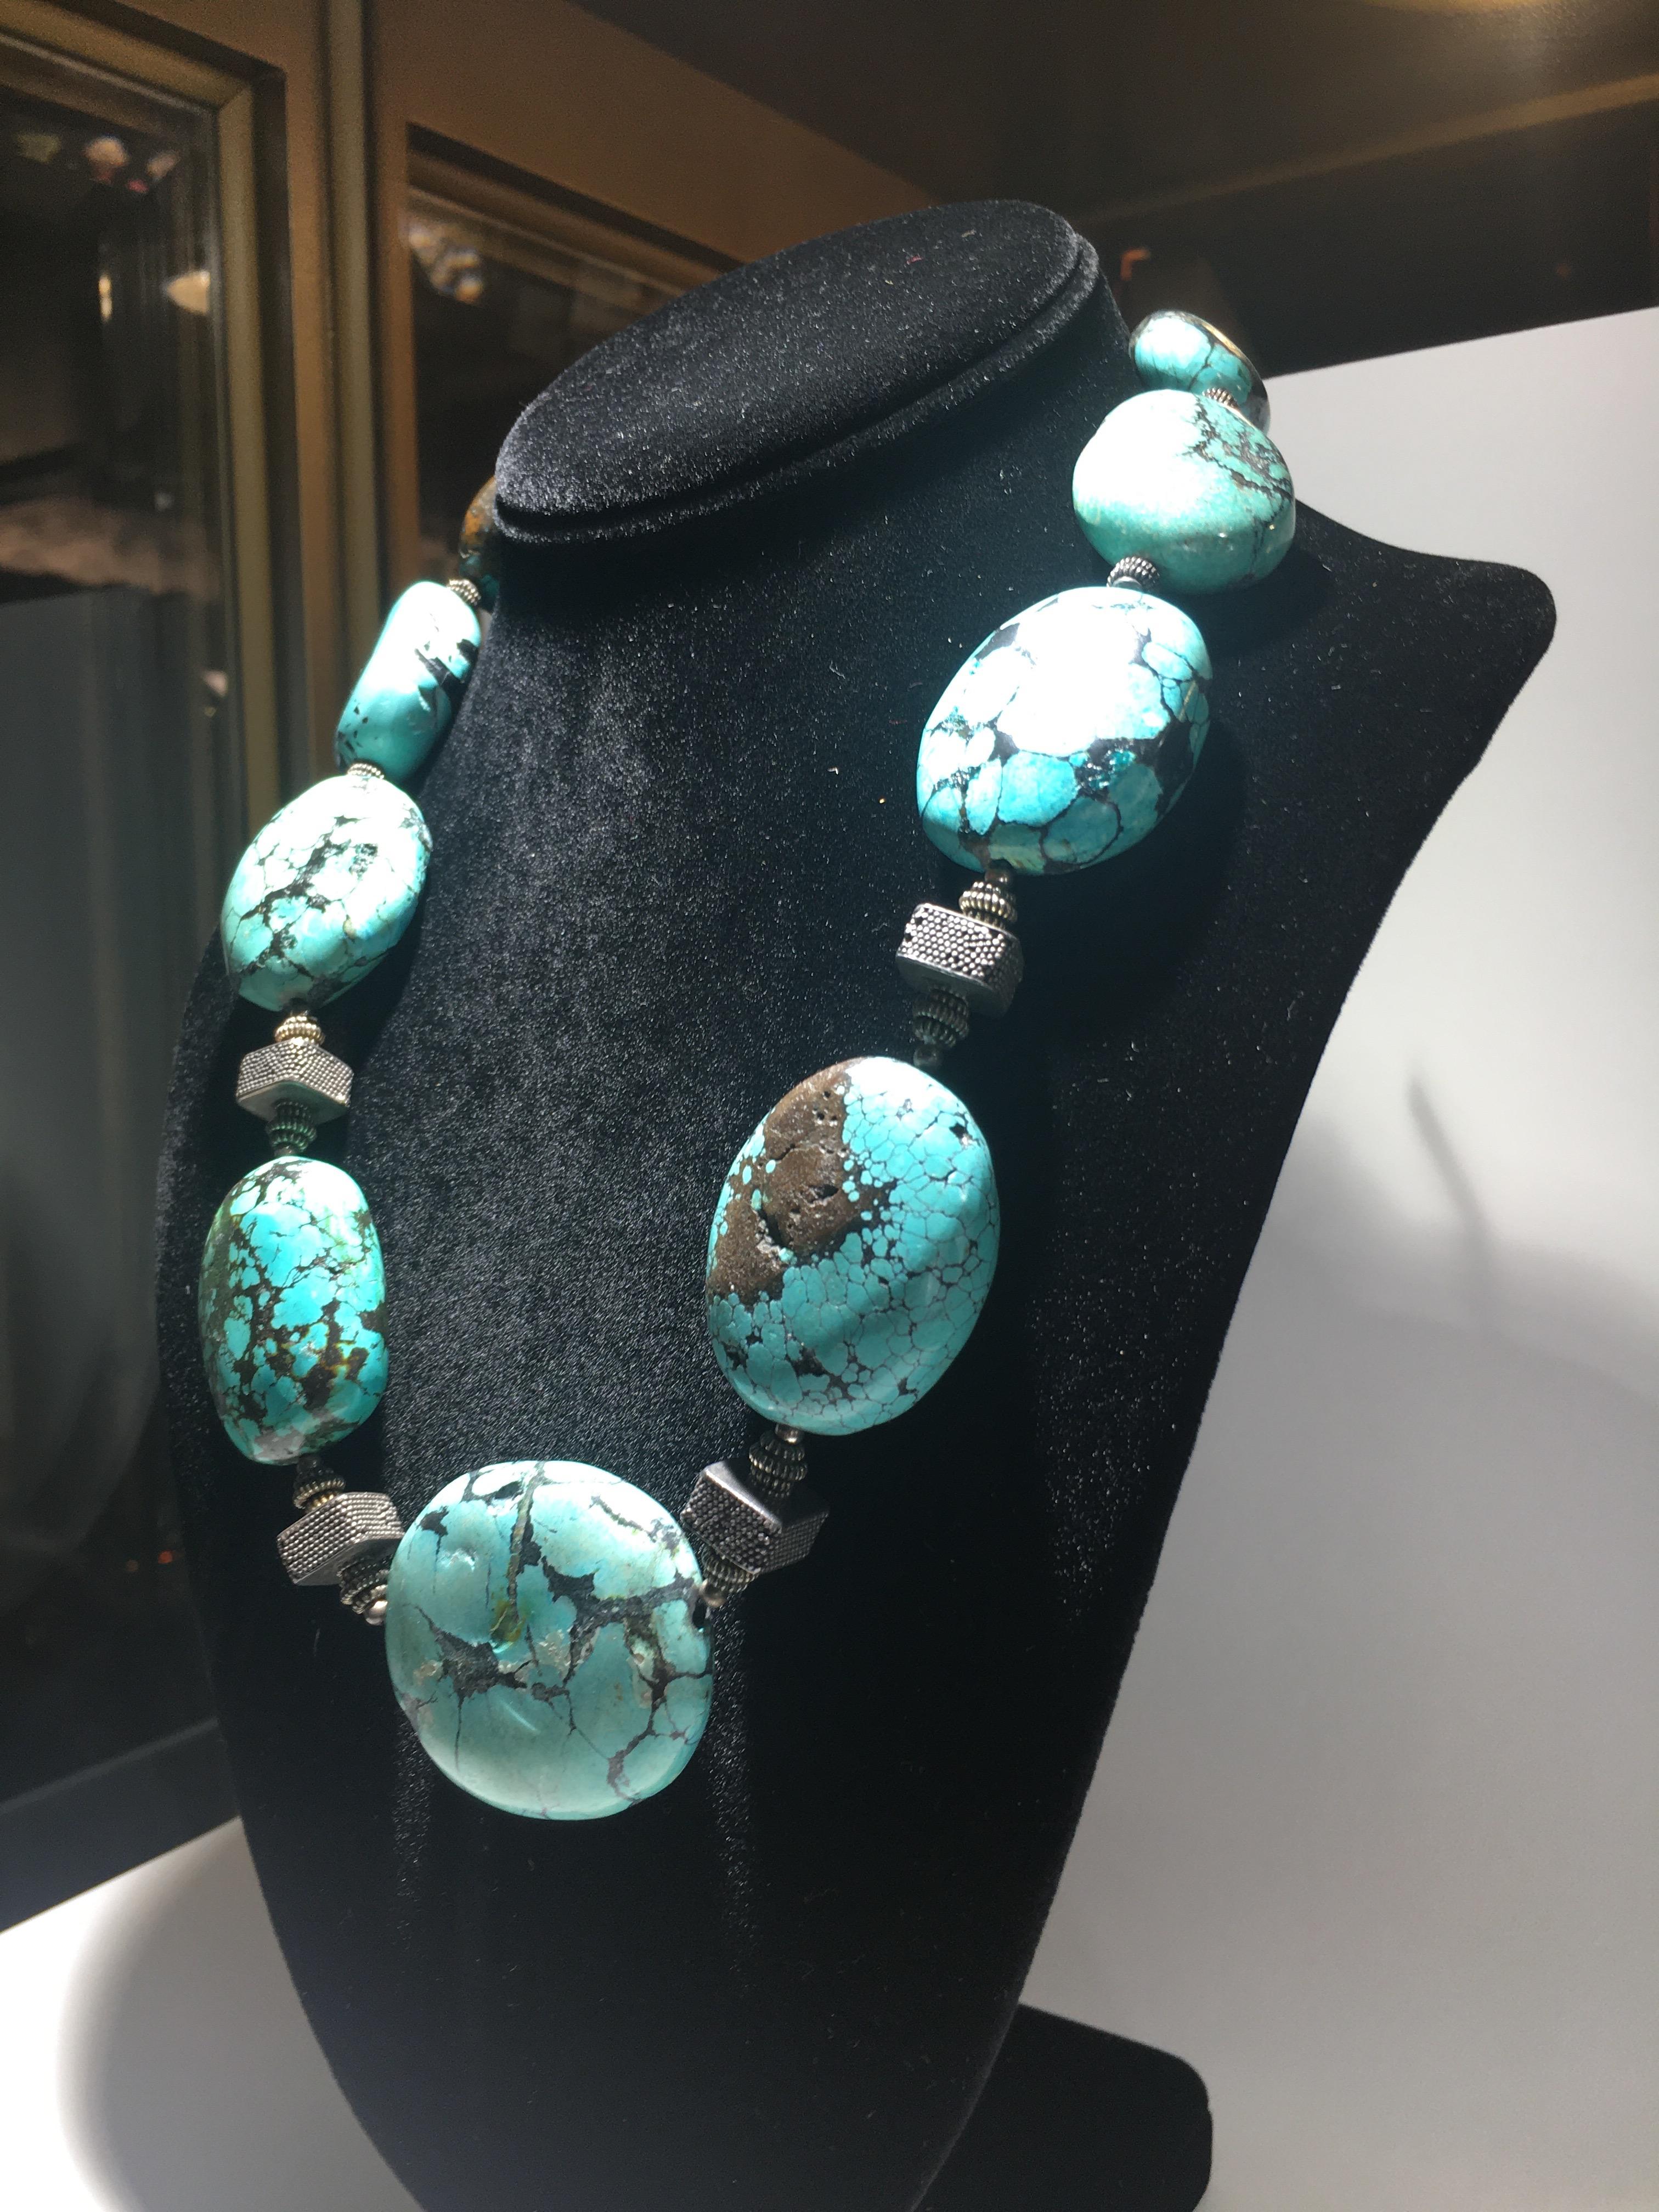 Very Bold Chunky Turquoise Necklace.  Iris Apfel Style.  Great Statement With A Simple White Blouse.